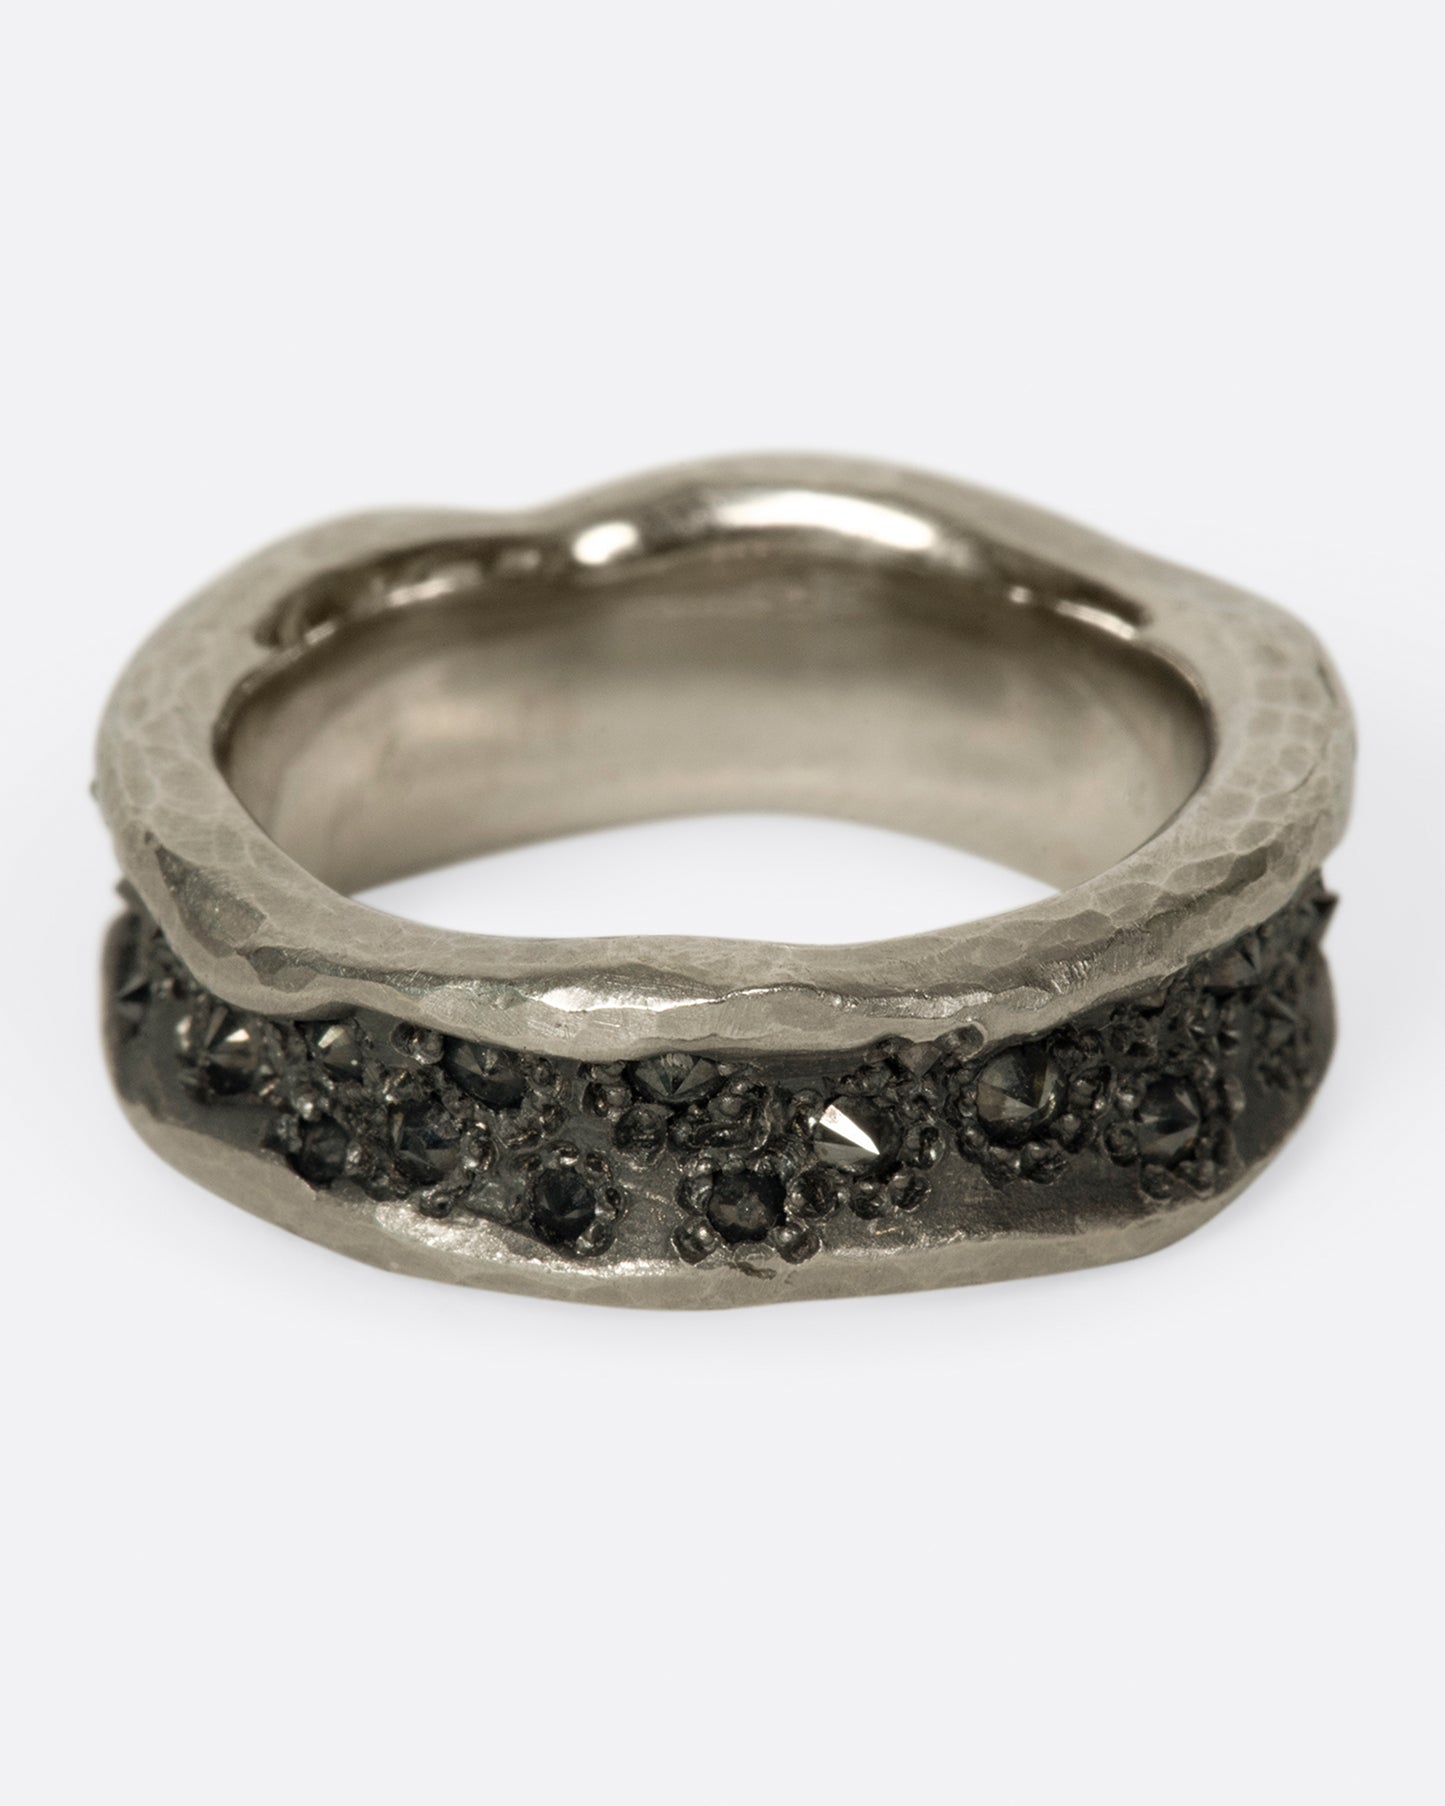 A concave, hammered palladium band with inverted black diamonds throughout its center.